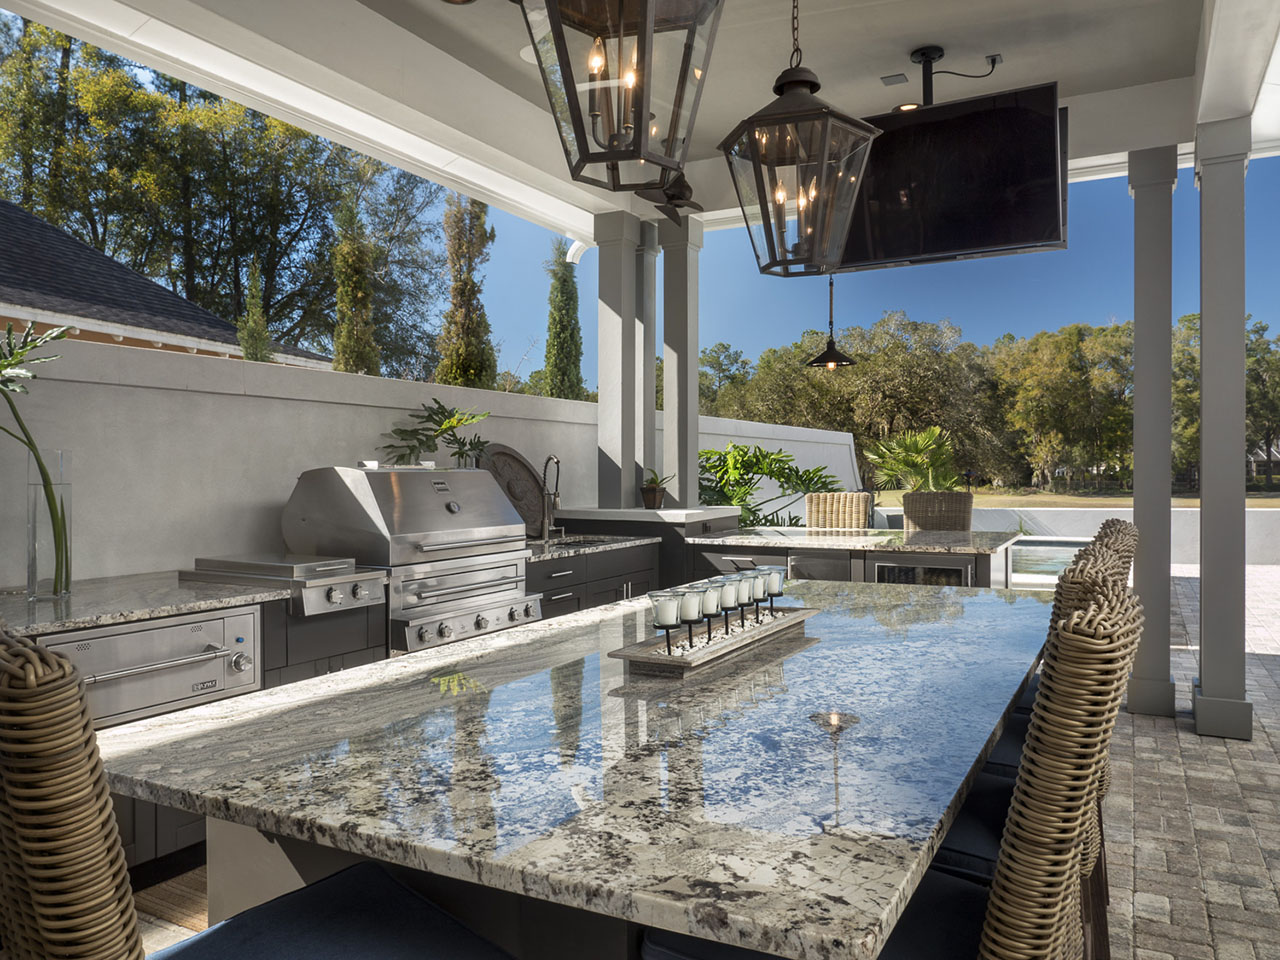 All About Outdoor Kitchen Design